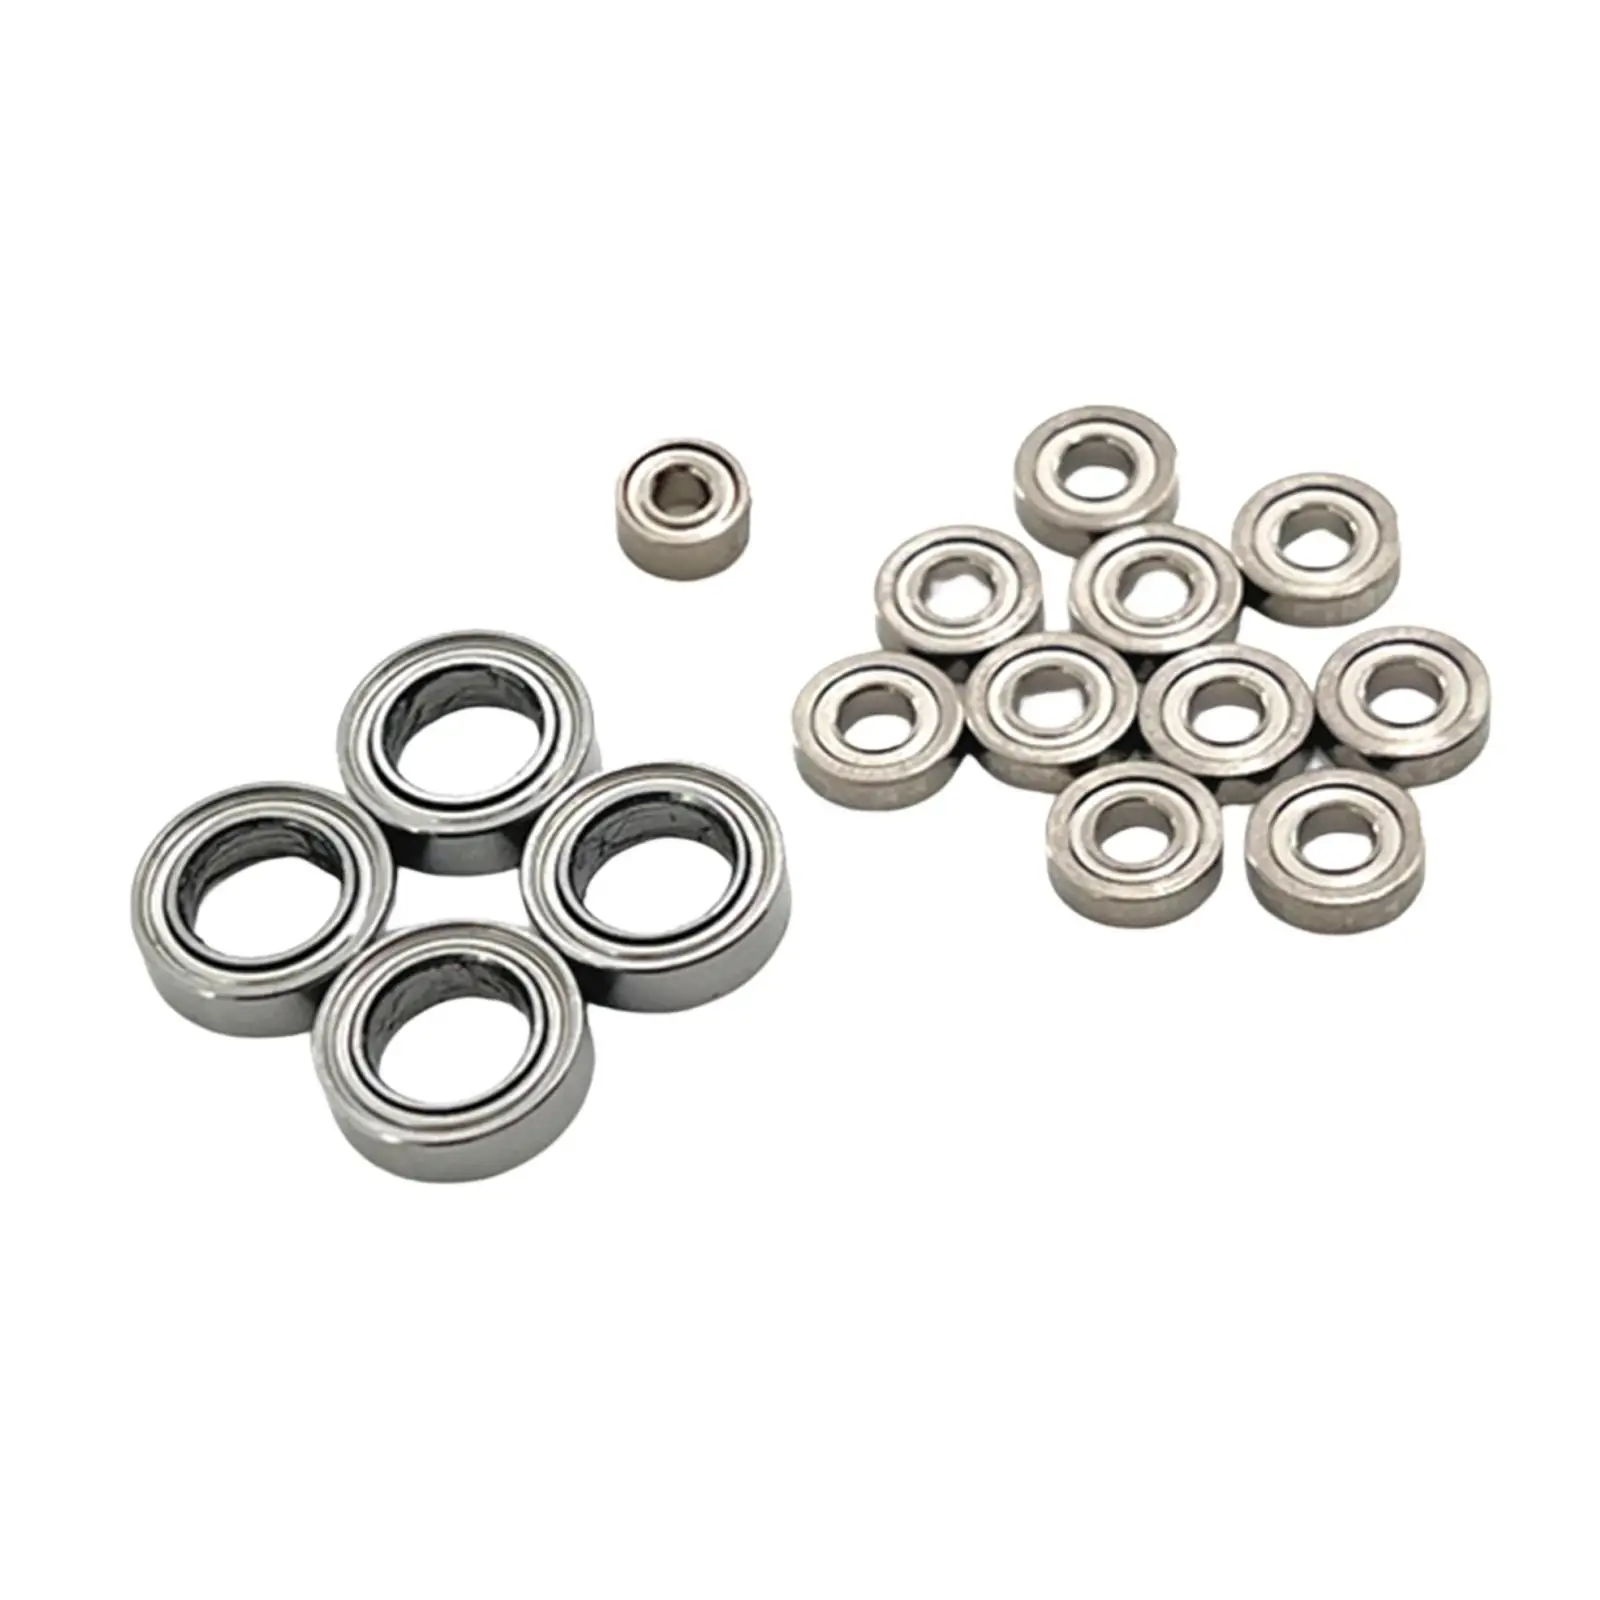 15 Pieces Metal Upgraded Ball Bearings for Wltoys 1/28 Scale RC Car Crawler